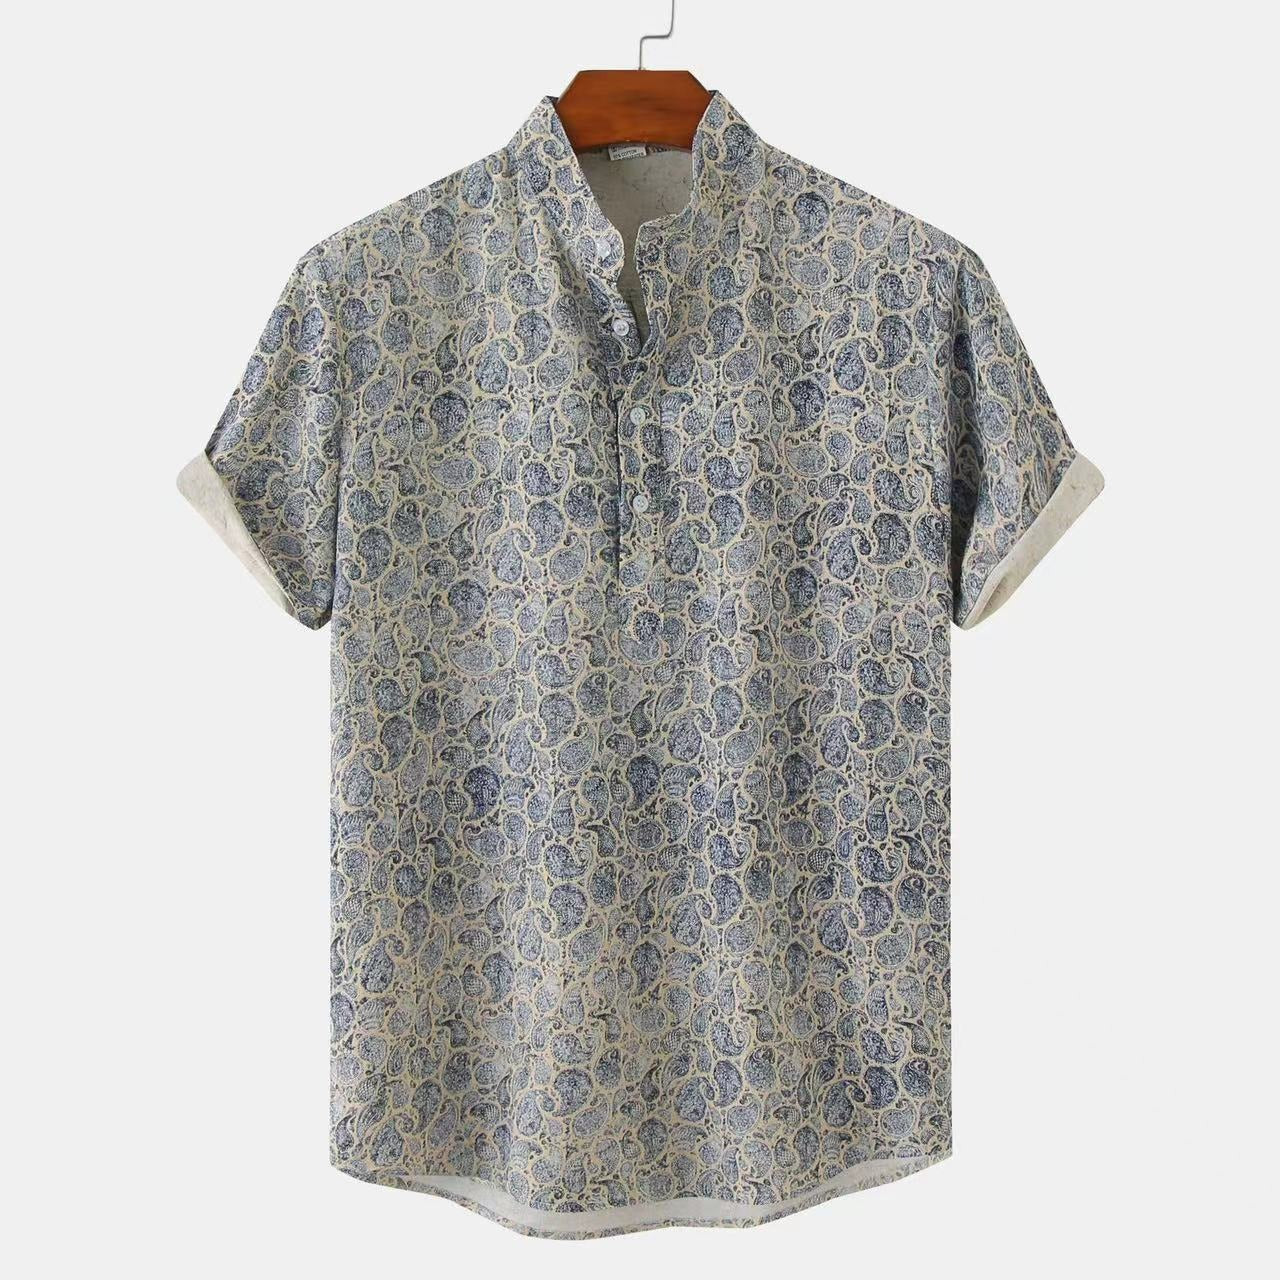 New Summer Floral Beach Short Sleeved Shirt In European and American Sizes, Summer Camouflage Printed Shirt For Men